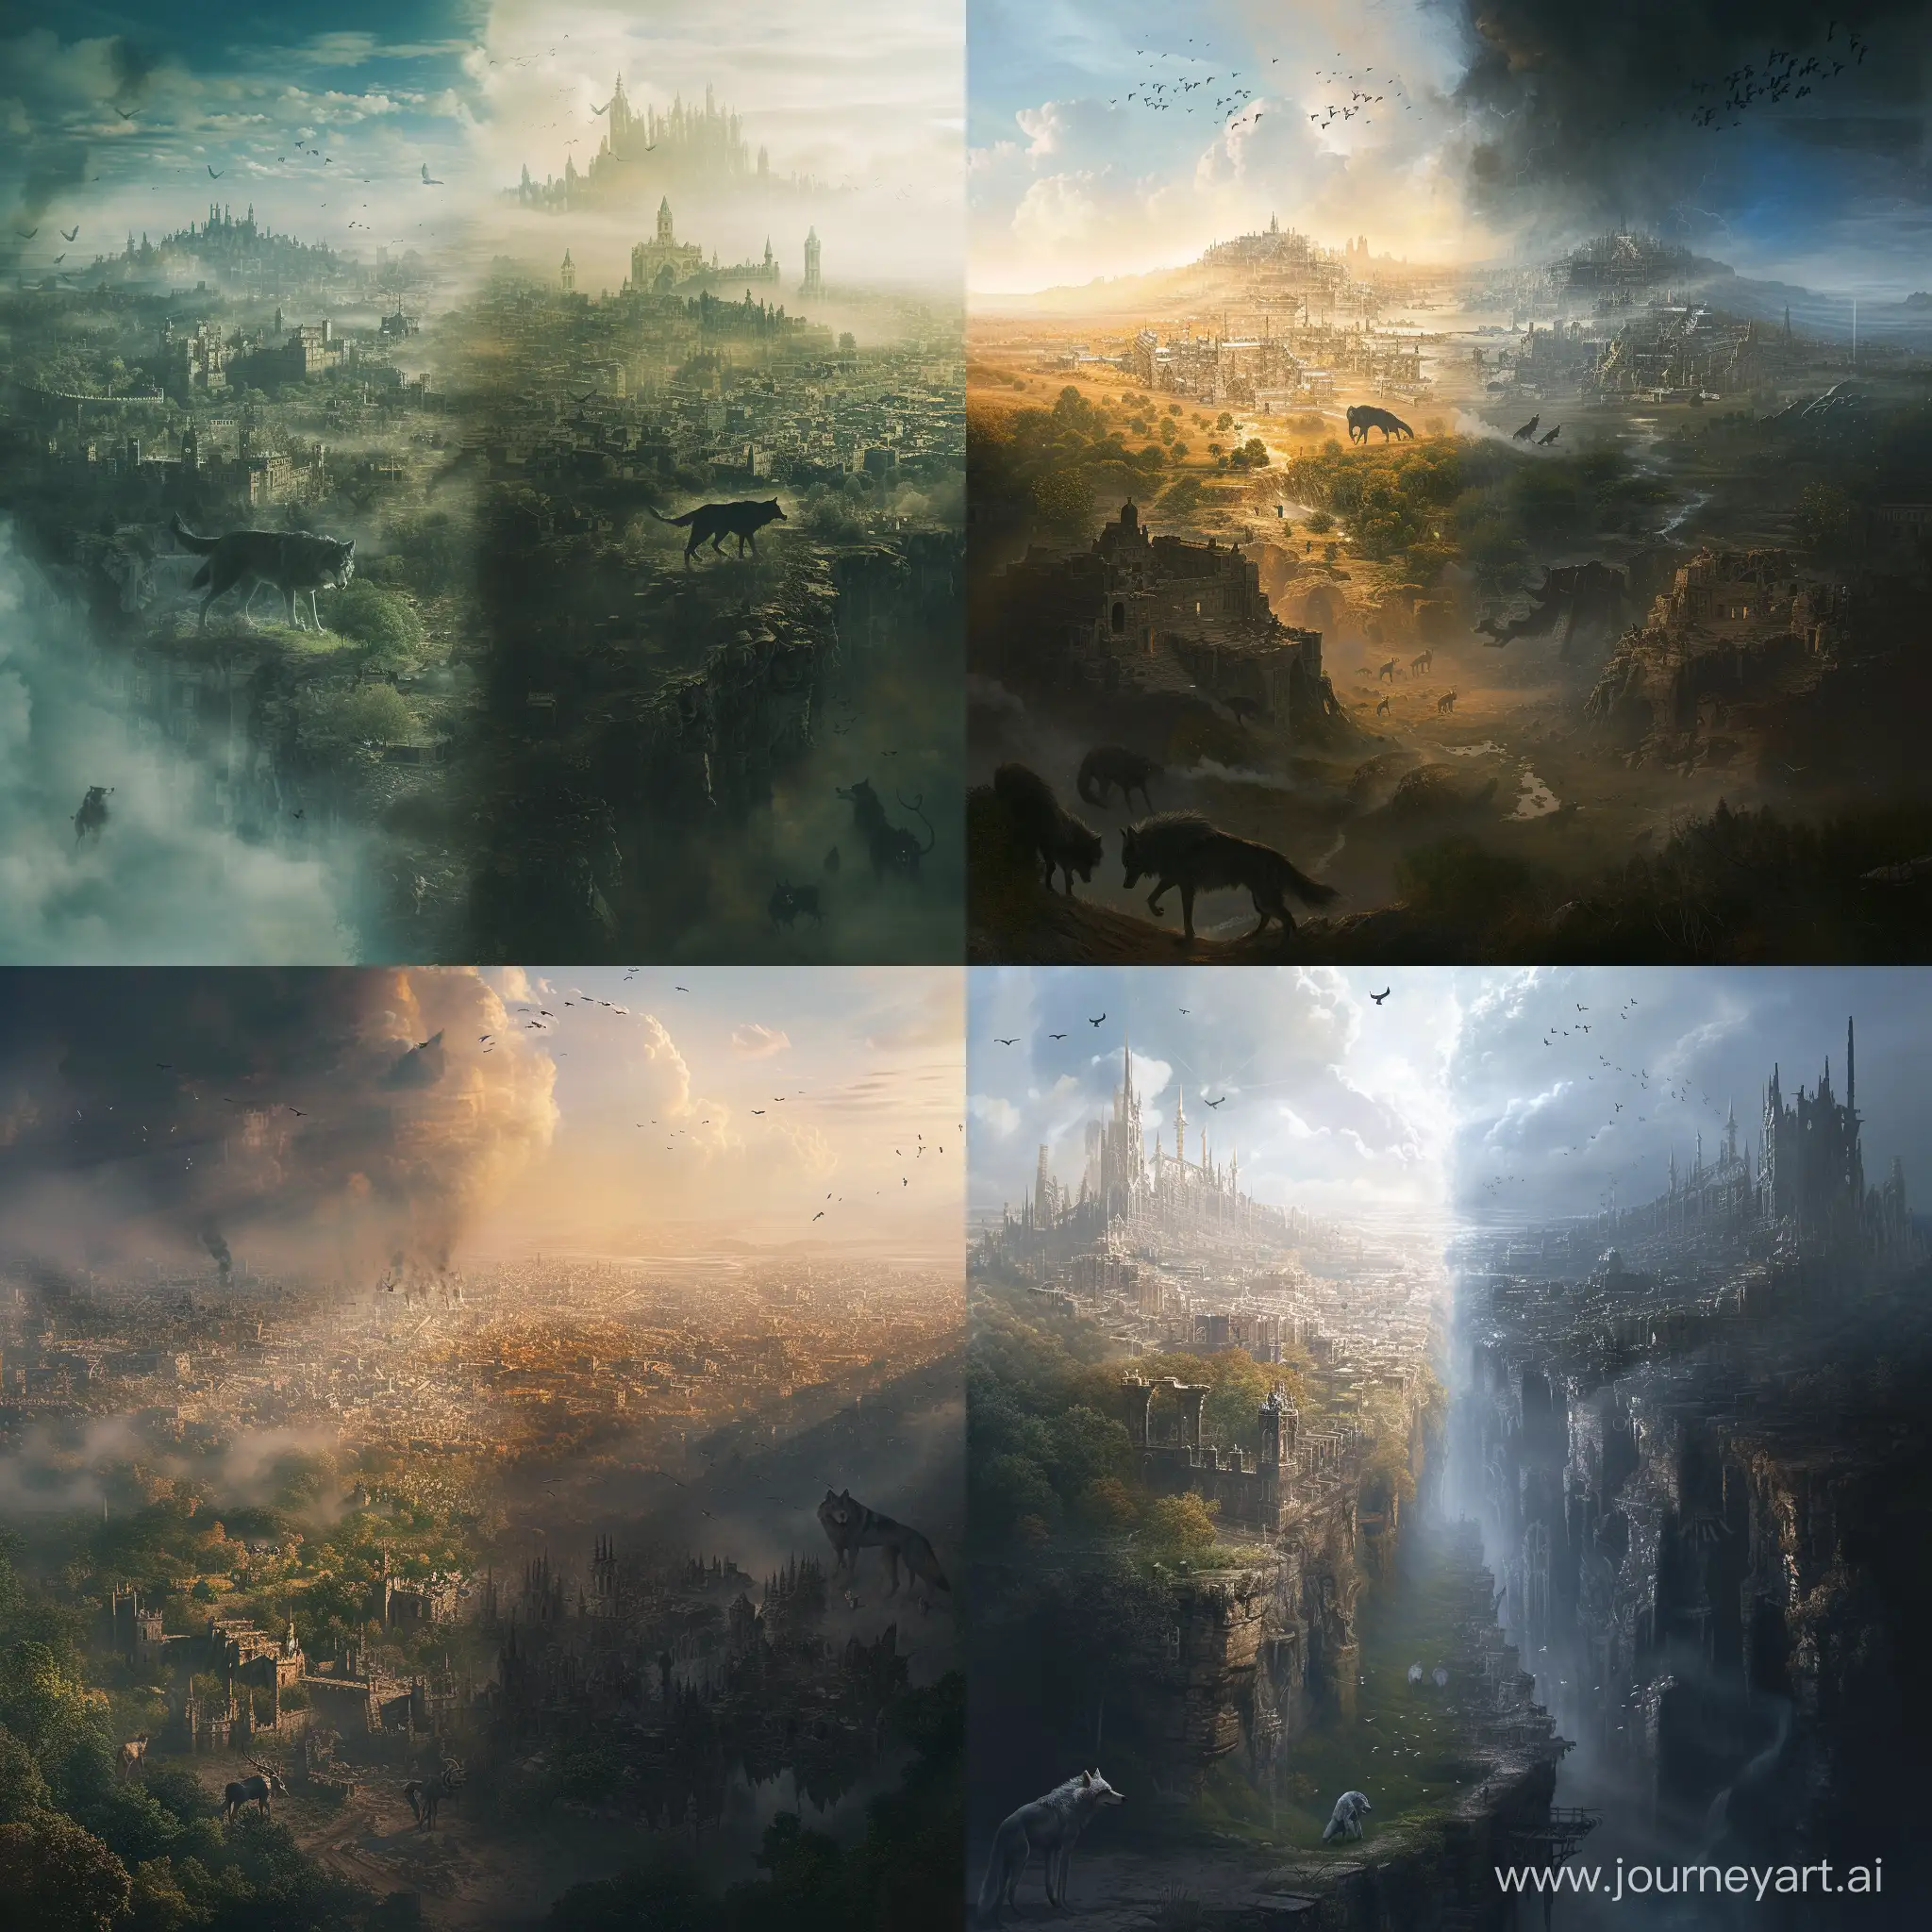 a distant panorama of a sprawling, awe-inspiring mythical city, shrouded in an ethereal mist that veils half of the city in gentle daylight, suffused with love and a sense of lush, welcoming nature. The other half looms in stark contrast, cloaked in an ominous darkness that accentuates its despair, with fierce wolves prowling amidst dilapidated structures. This city encapsulates a world teetering between profound sorrow and unbridled joy, representing the intricate coexistence of contrasting emotions on each side --q 4